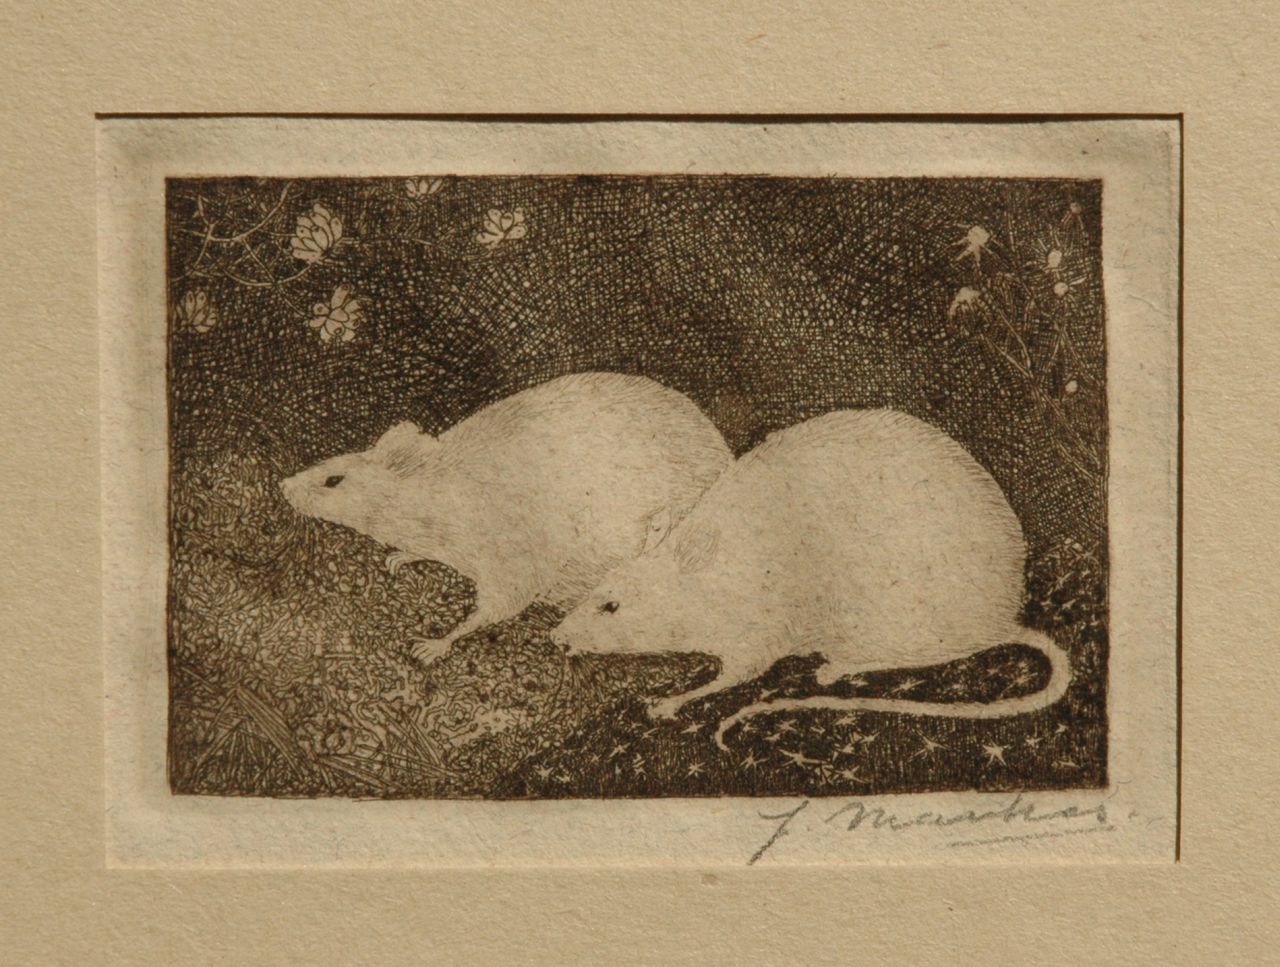 Mankes J.  | Jan Mankes, Two mice, Radierung auf Papier 6,8 x 10,2 cm, signed l.r. (with pencil) und executed in 1916